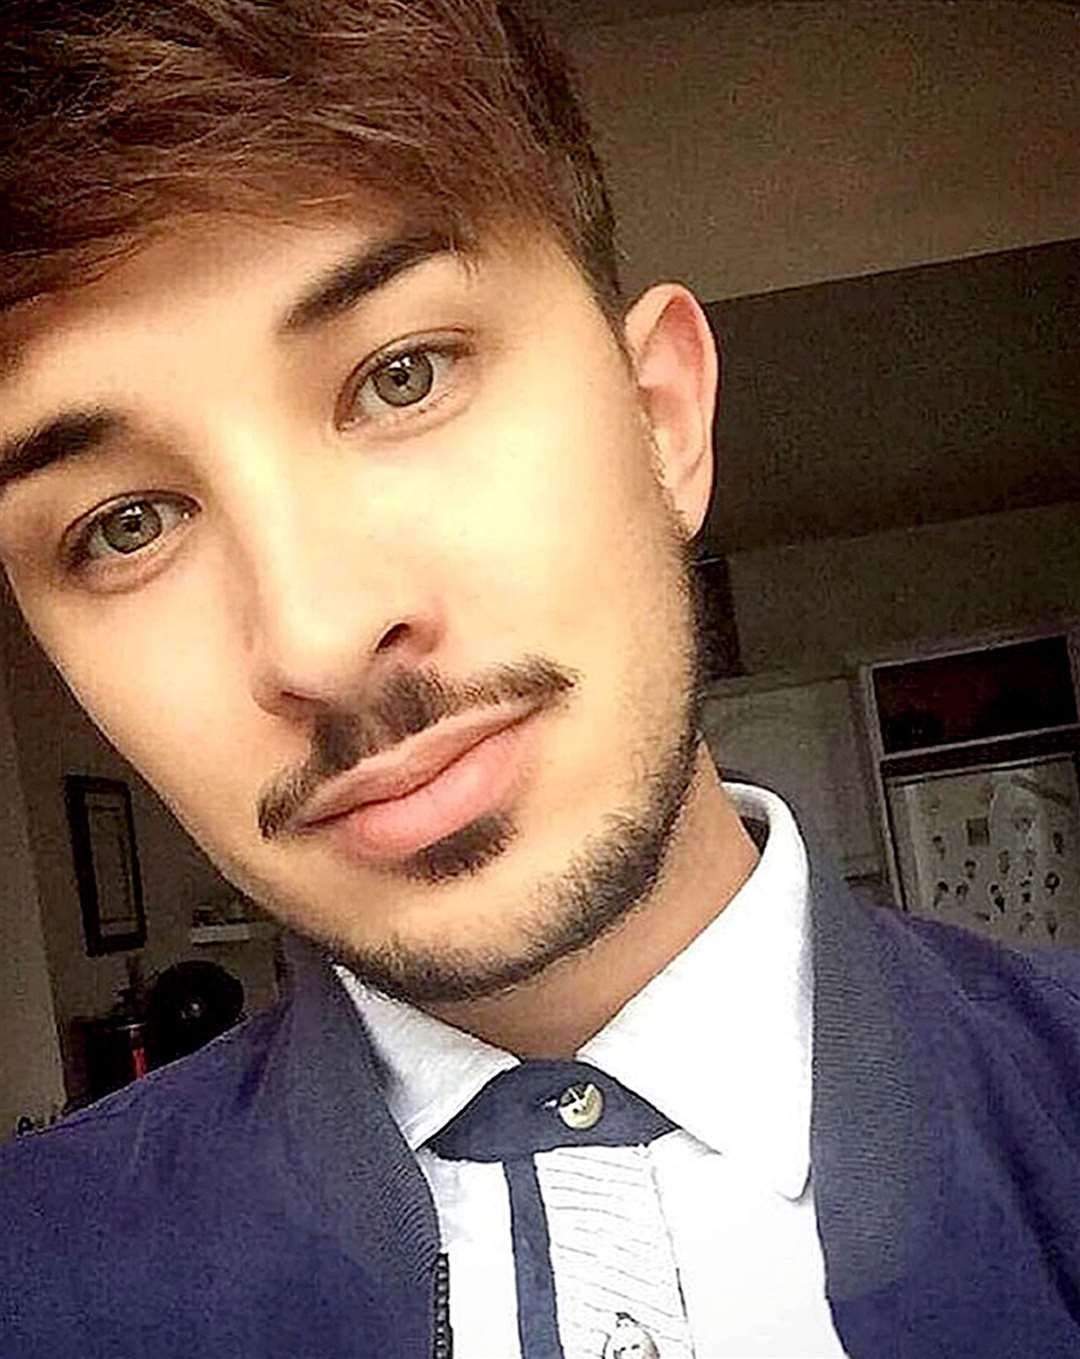 Martyn Hett, 29, was one of 22 people killed during the attack in May 2017 (Family handout/PA)